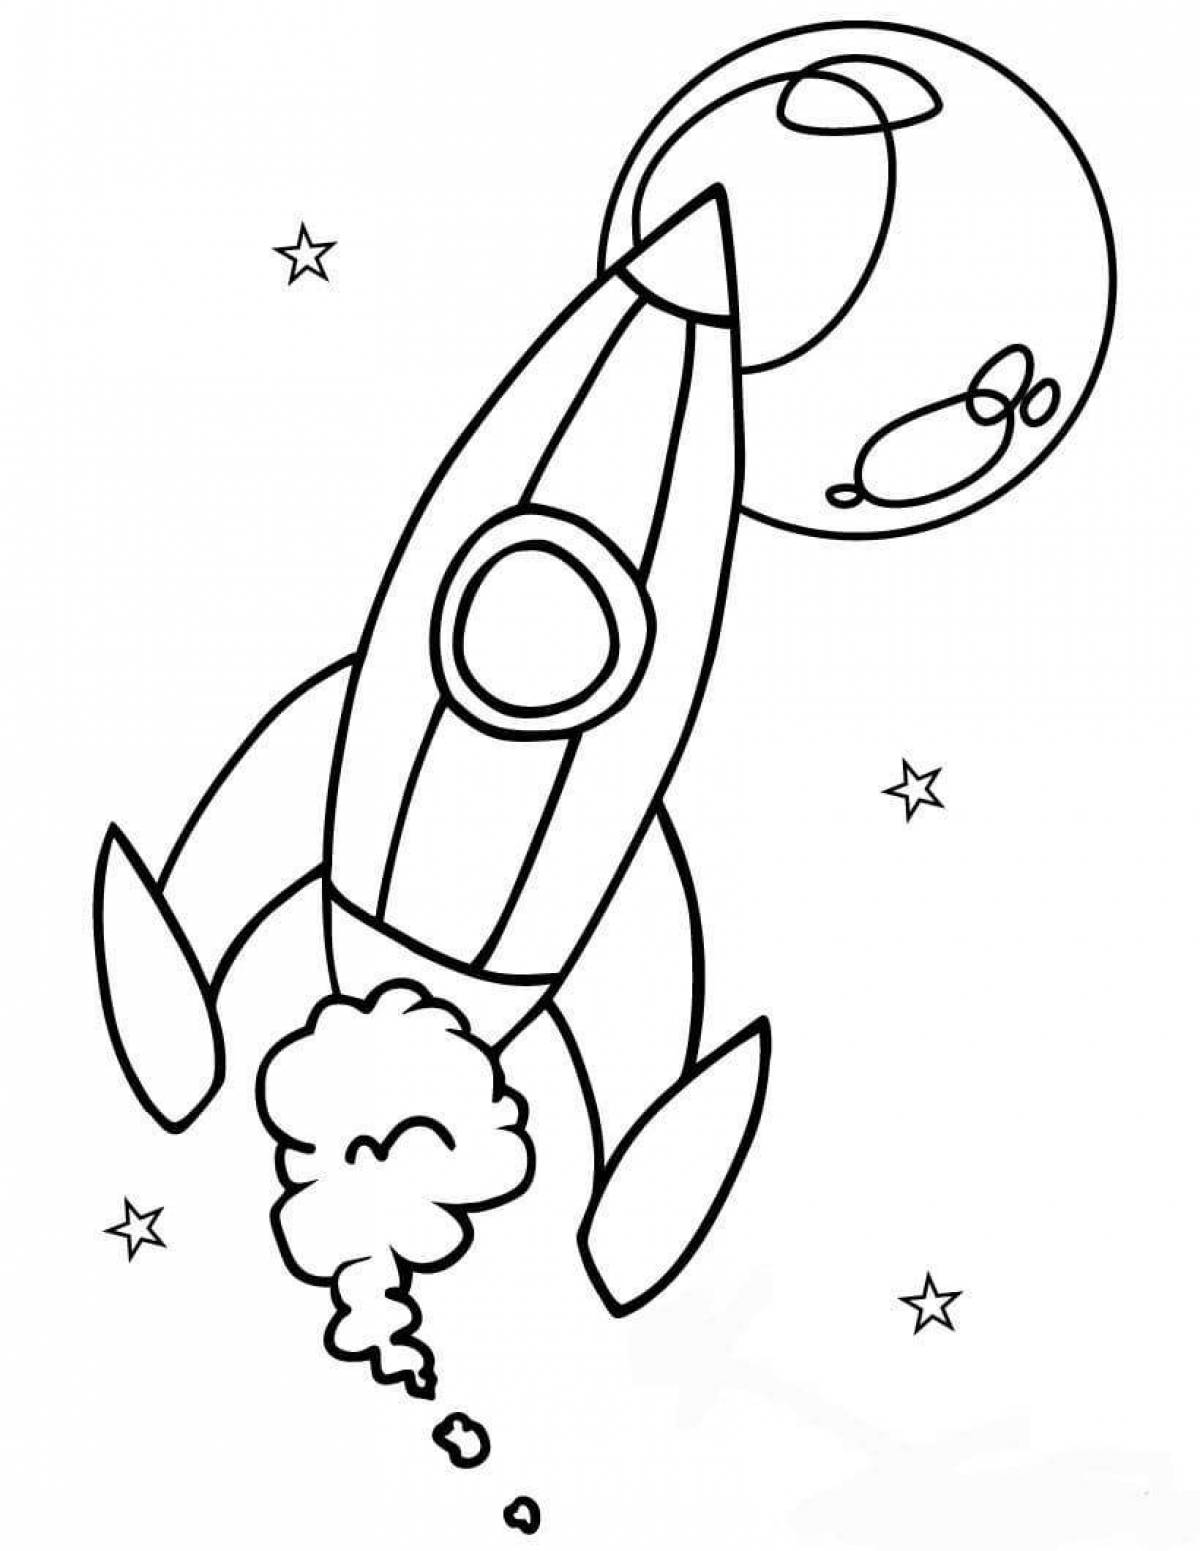 Fun rocket coloring book for 6-7 year olds